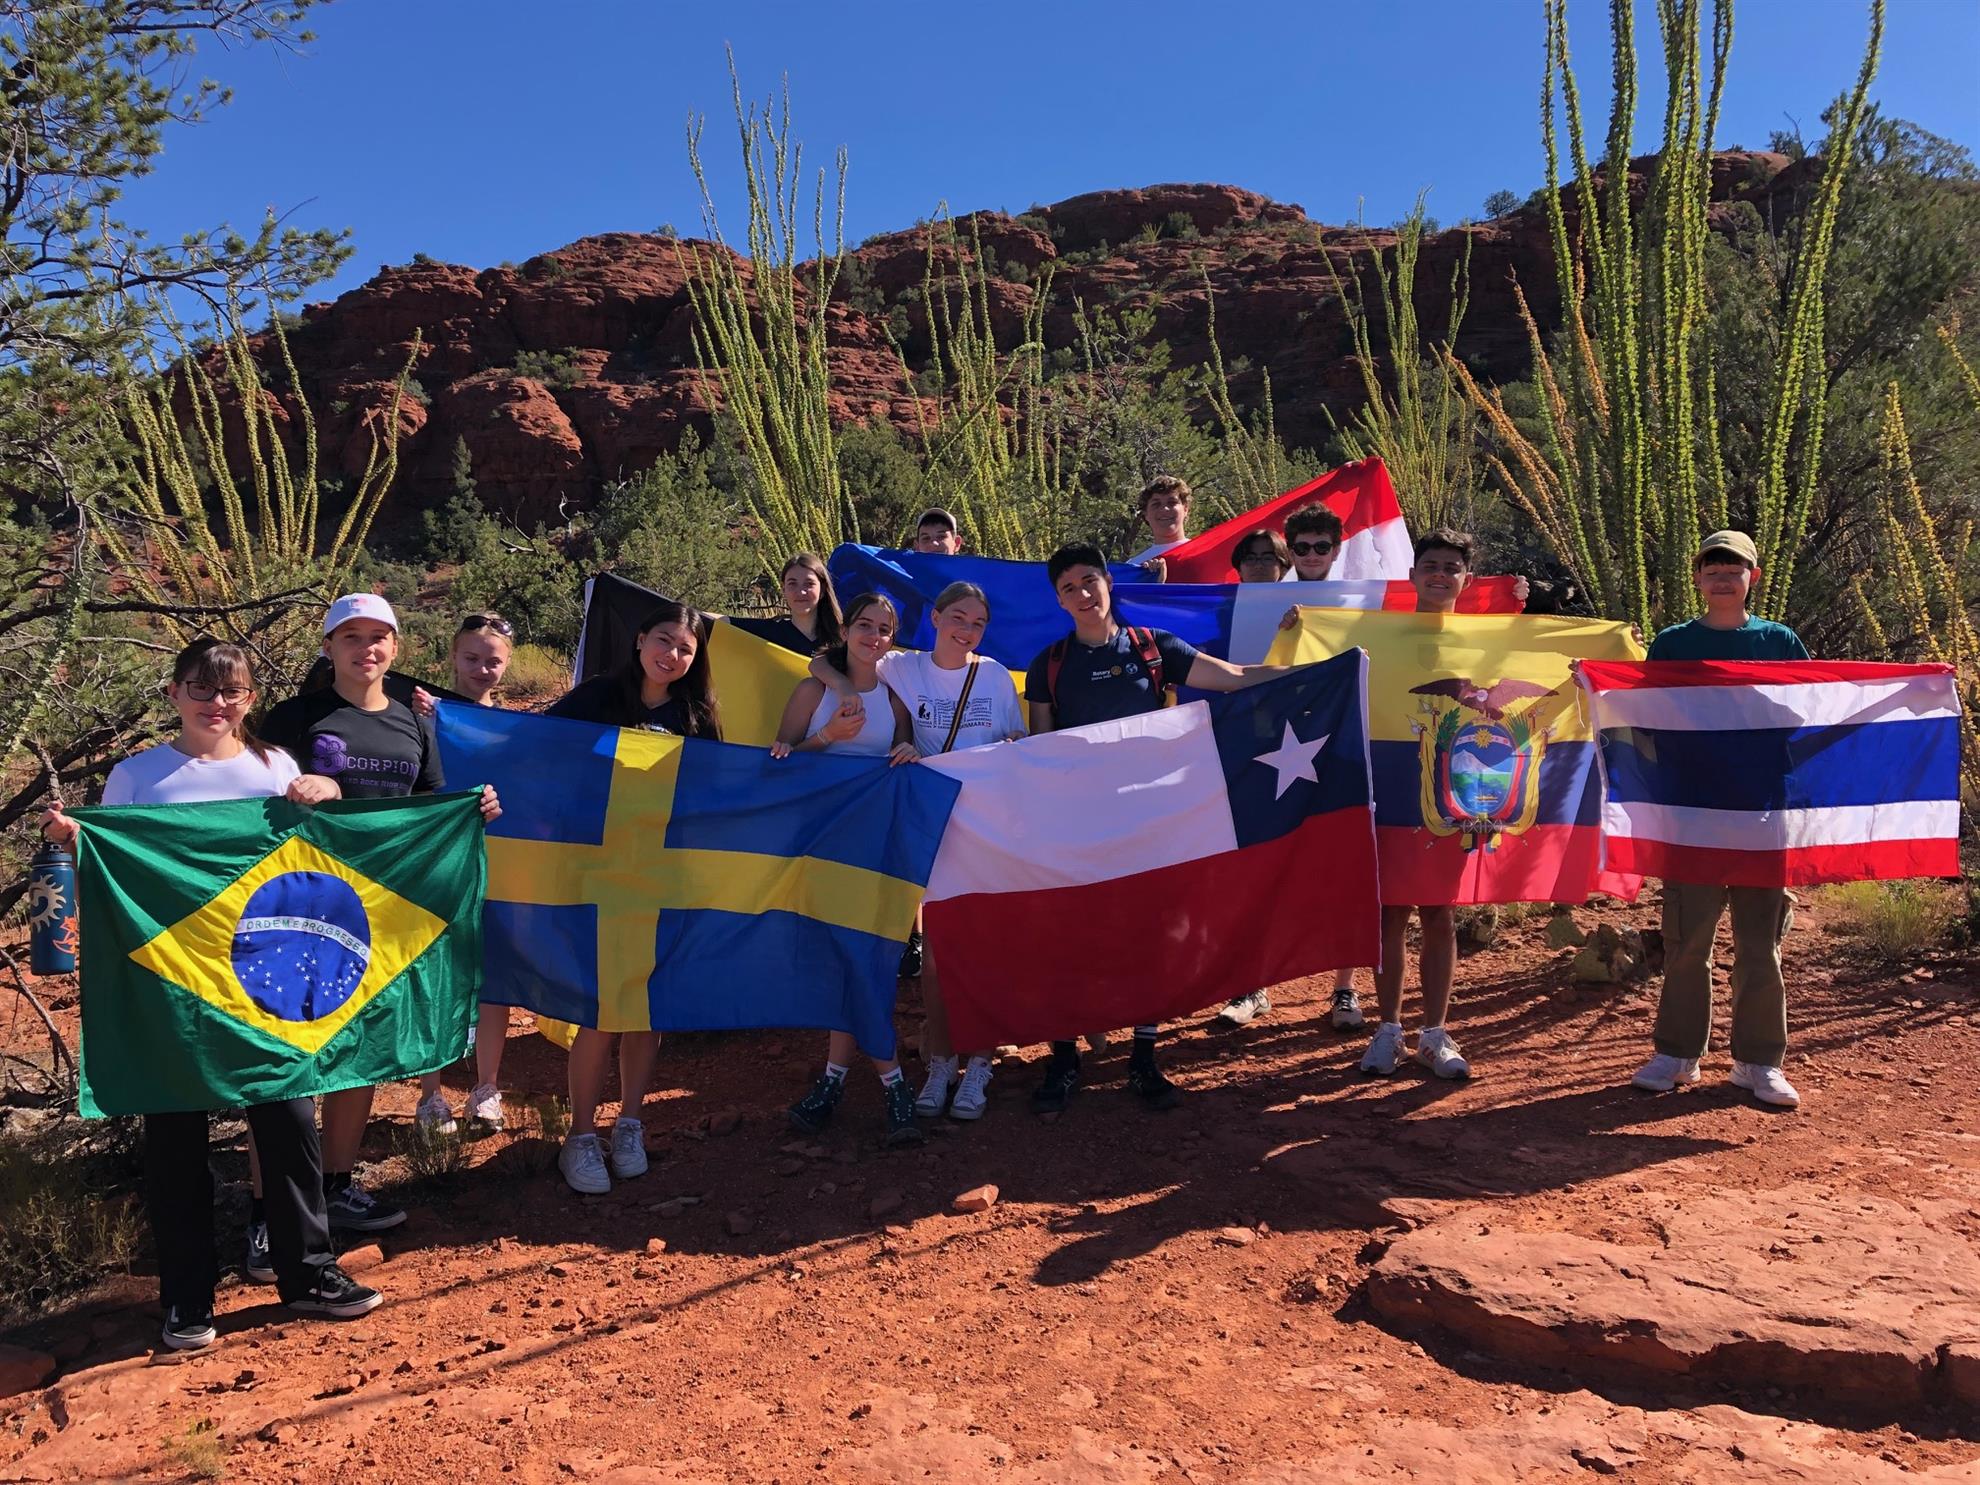 Stuedent exchange visitors to Sedona display their flags.